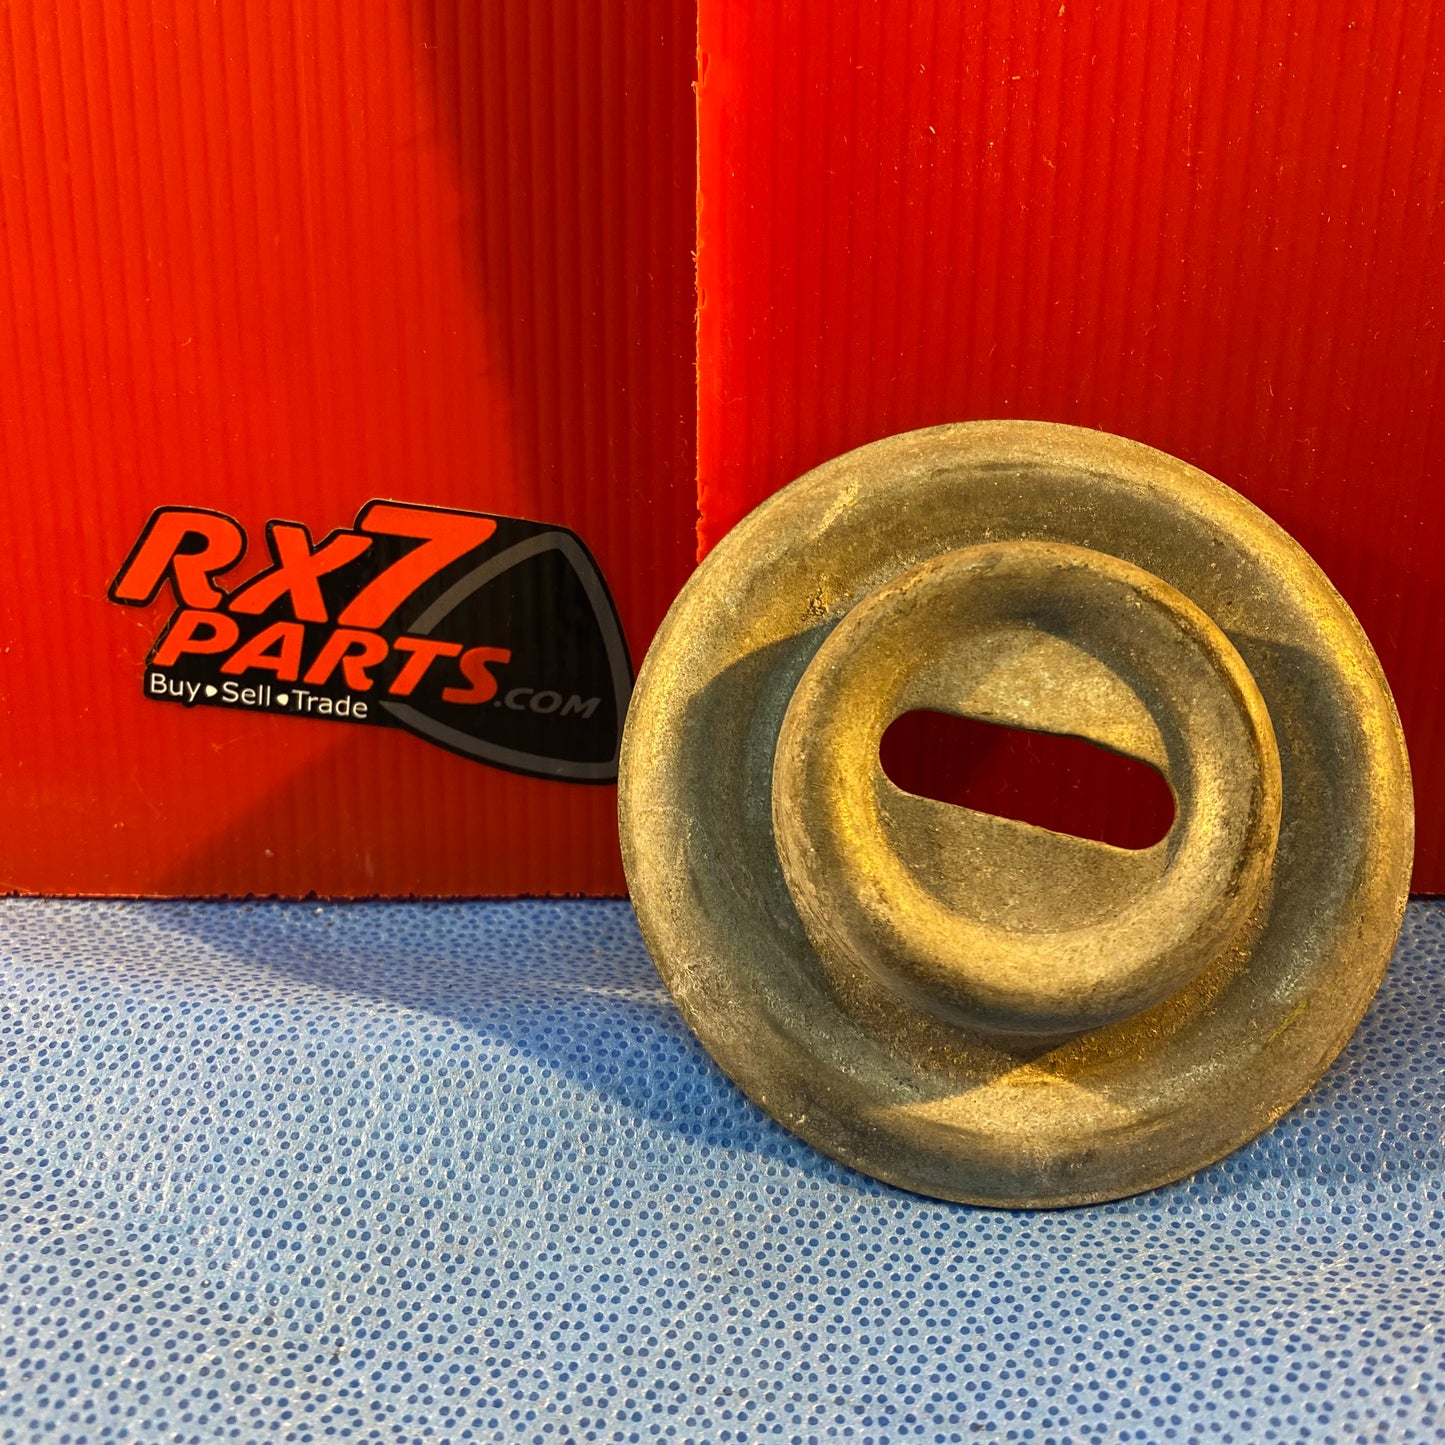 LHD, RHD Spare Tire Retainer Ring/Washer : Metal   Mazda Rx7 FD3S FD S4B4STR - RX7Parts